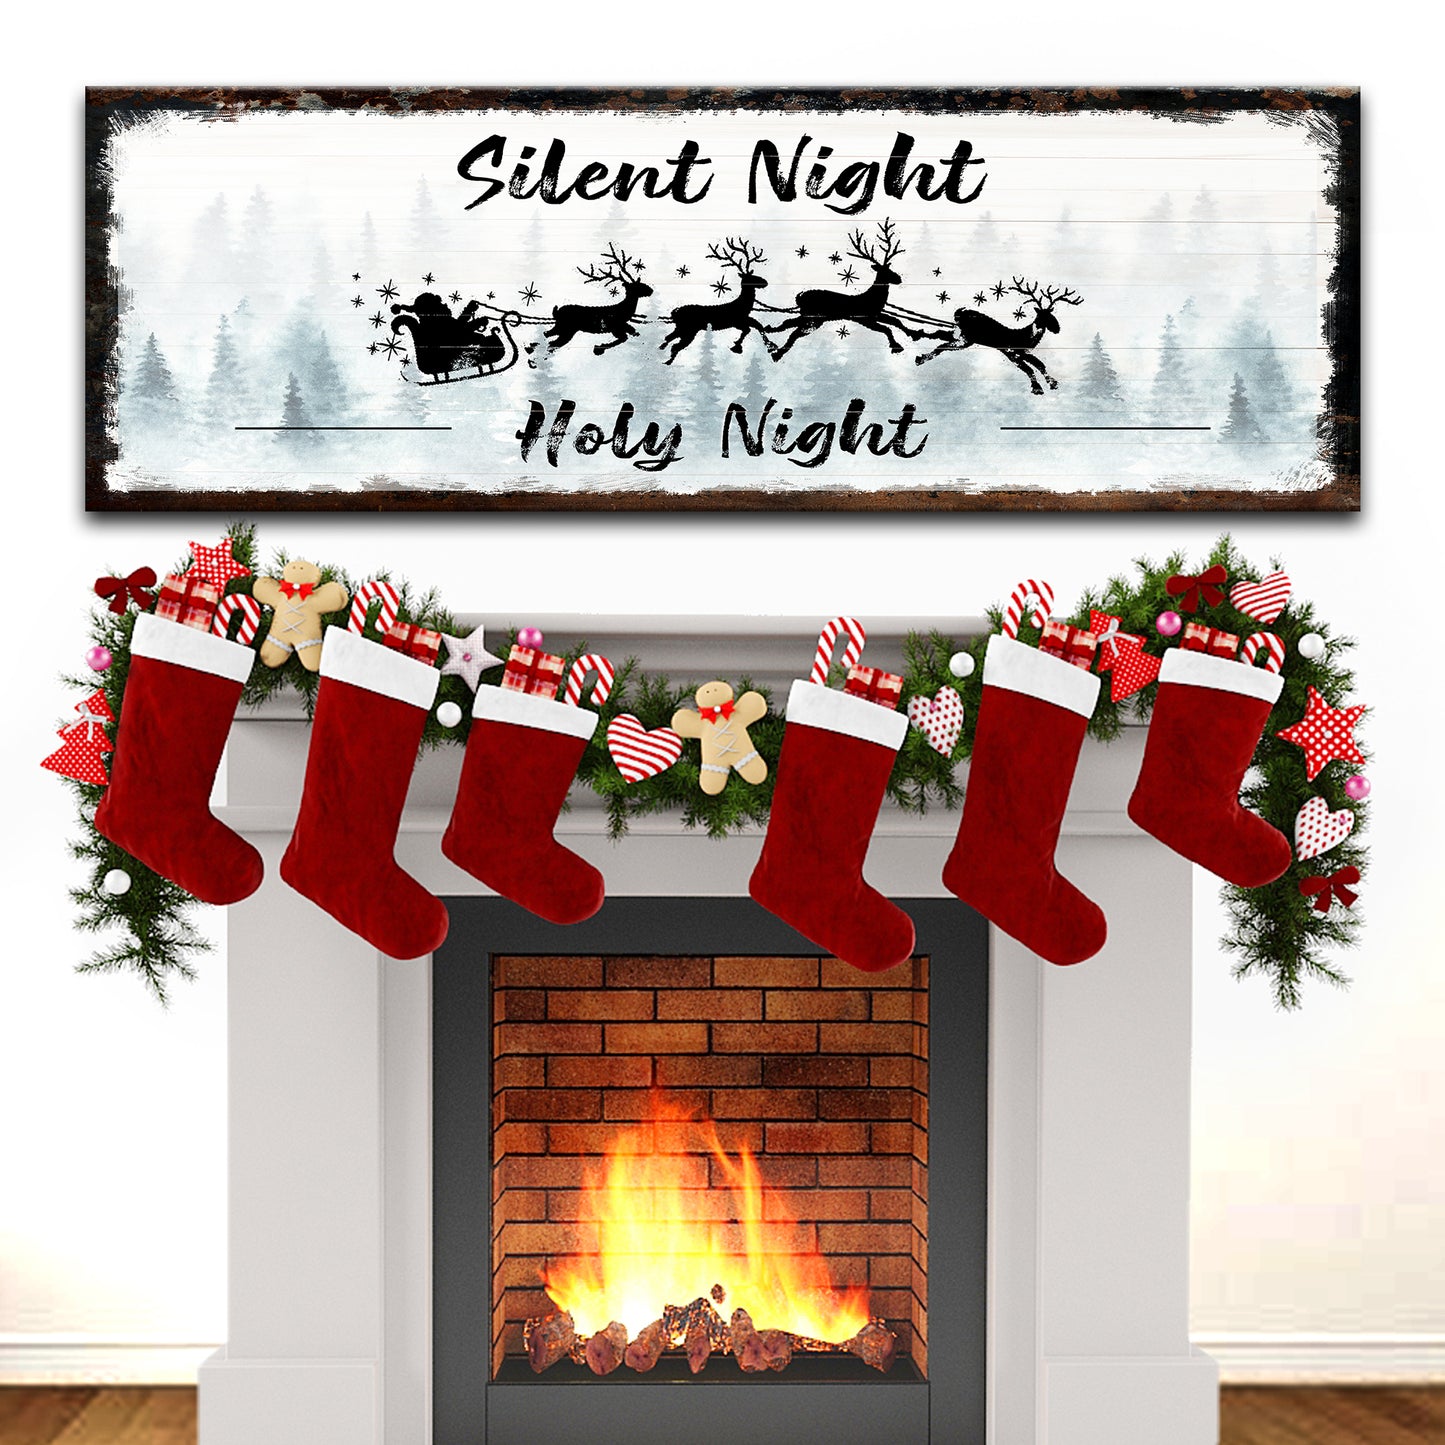 Silent Night Holy Night Sign II - Image by Tailored Canvases